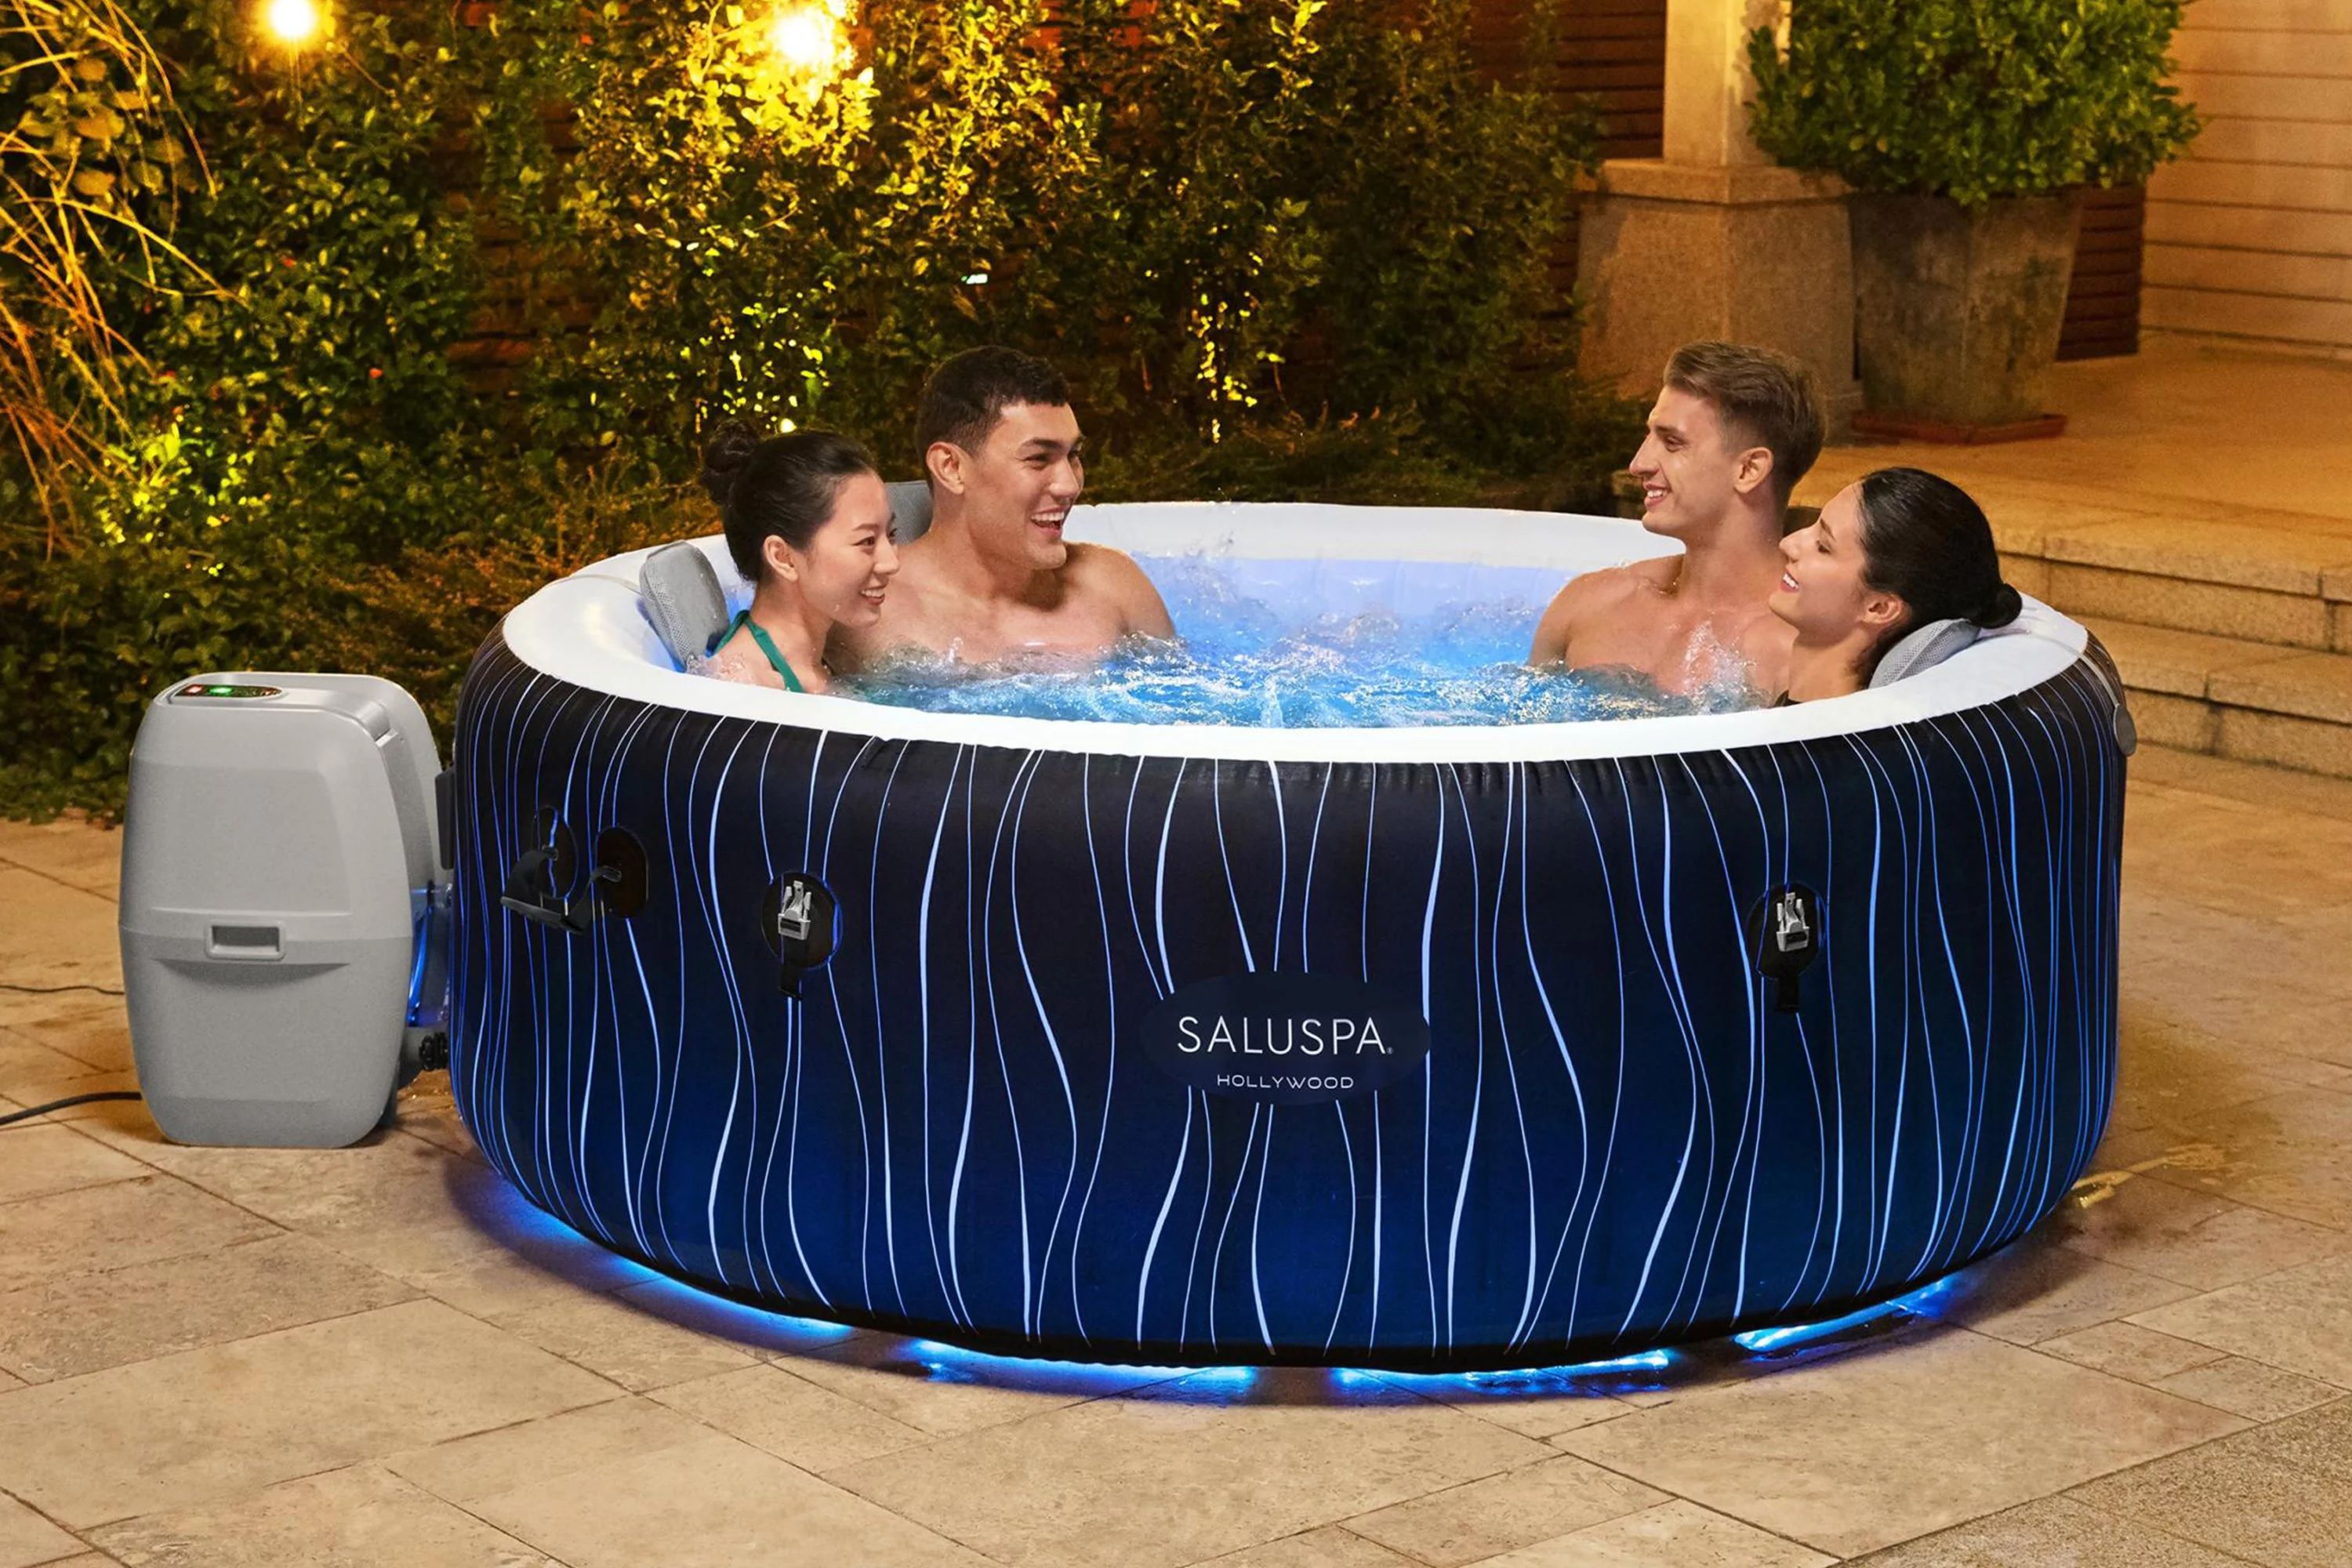 SaluSpa Hollywood AirJet Inflatable Hot Tub Spa with Color-Changing LED Lights 4-6 Person | Walmart (US)